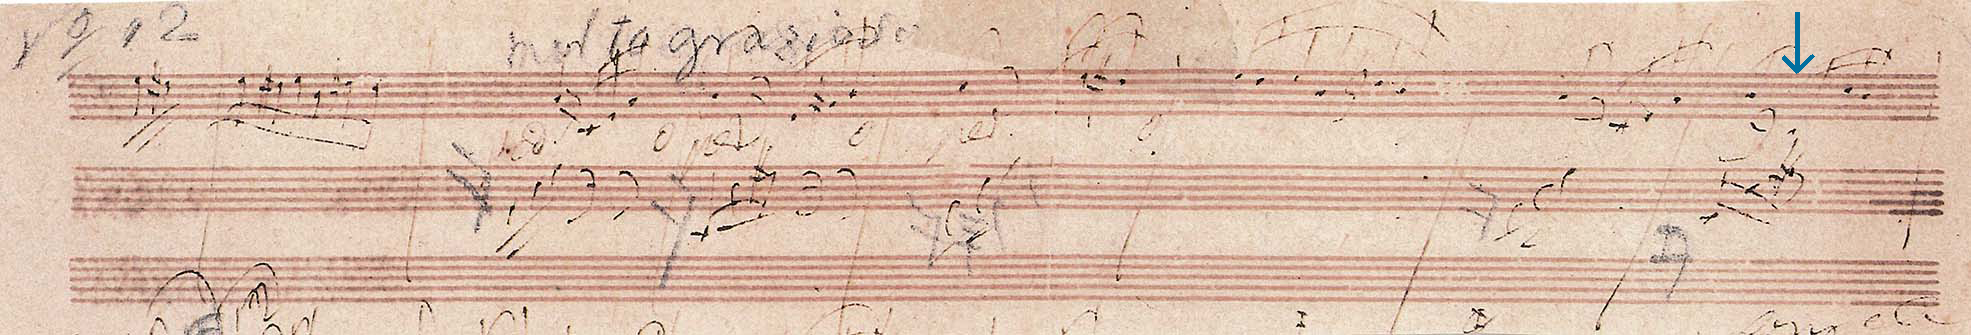 Beethoven, Für Elise WoO 59 – Do strike the right note? | Henle Blog